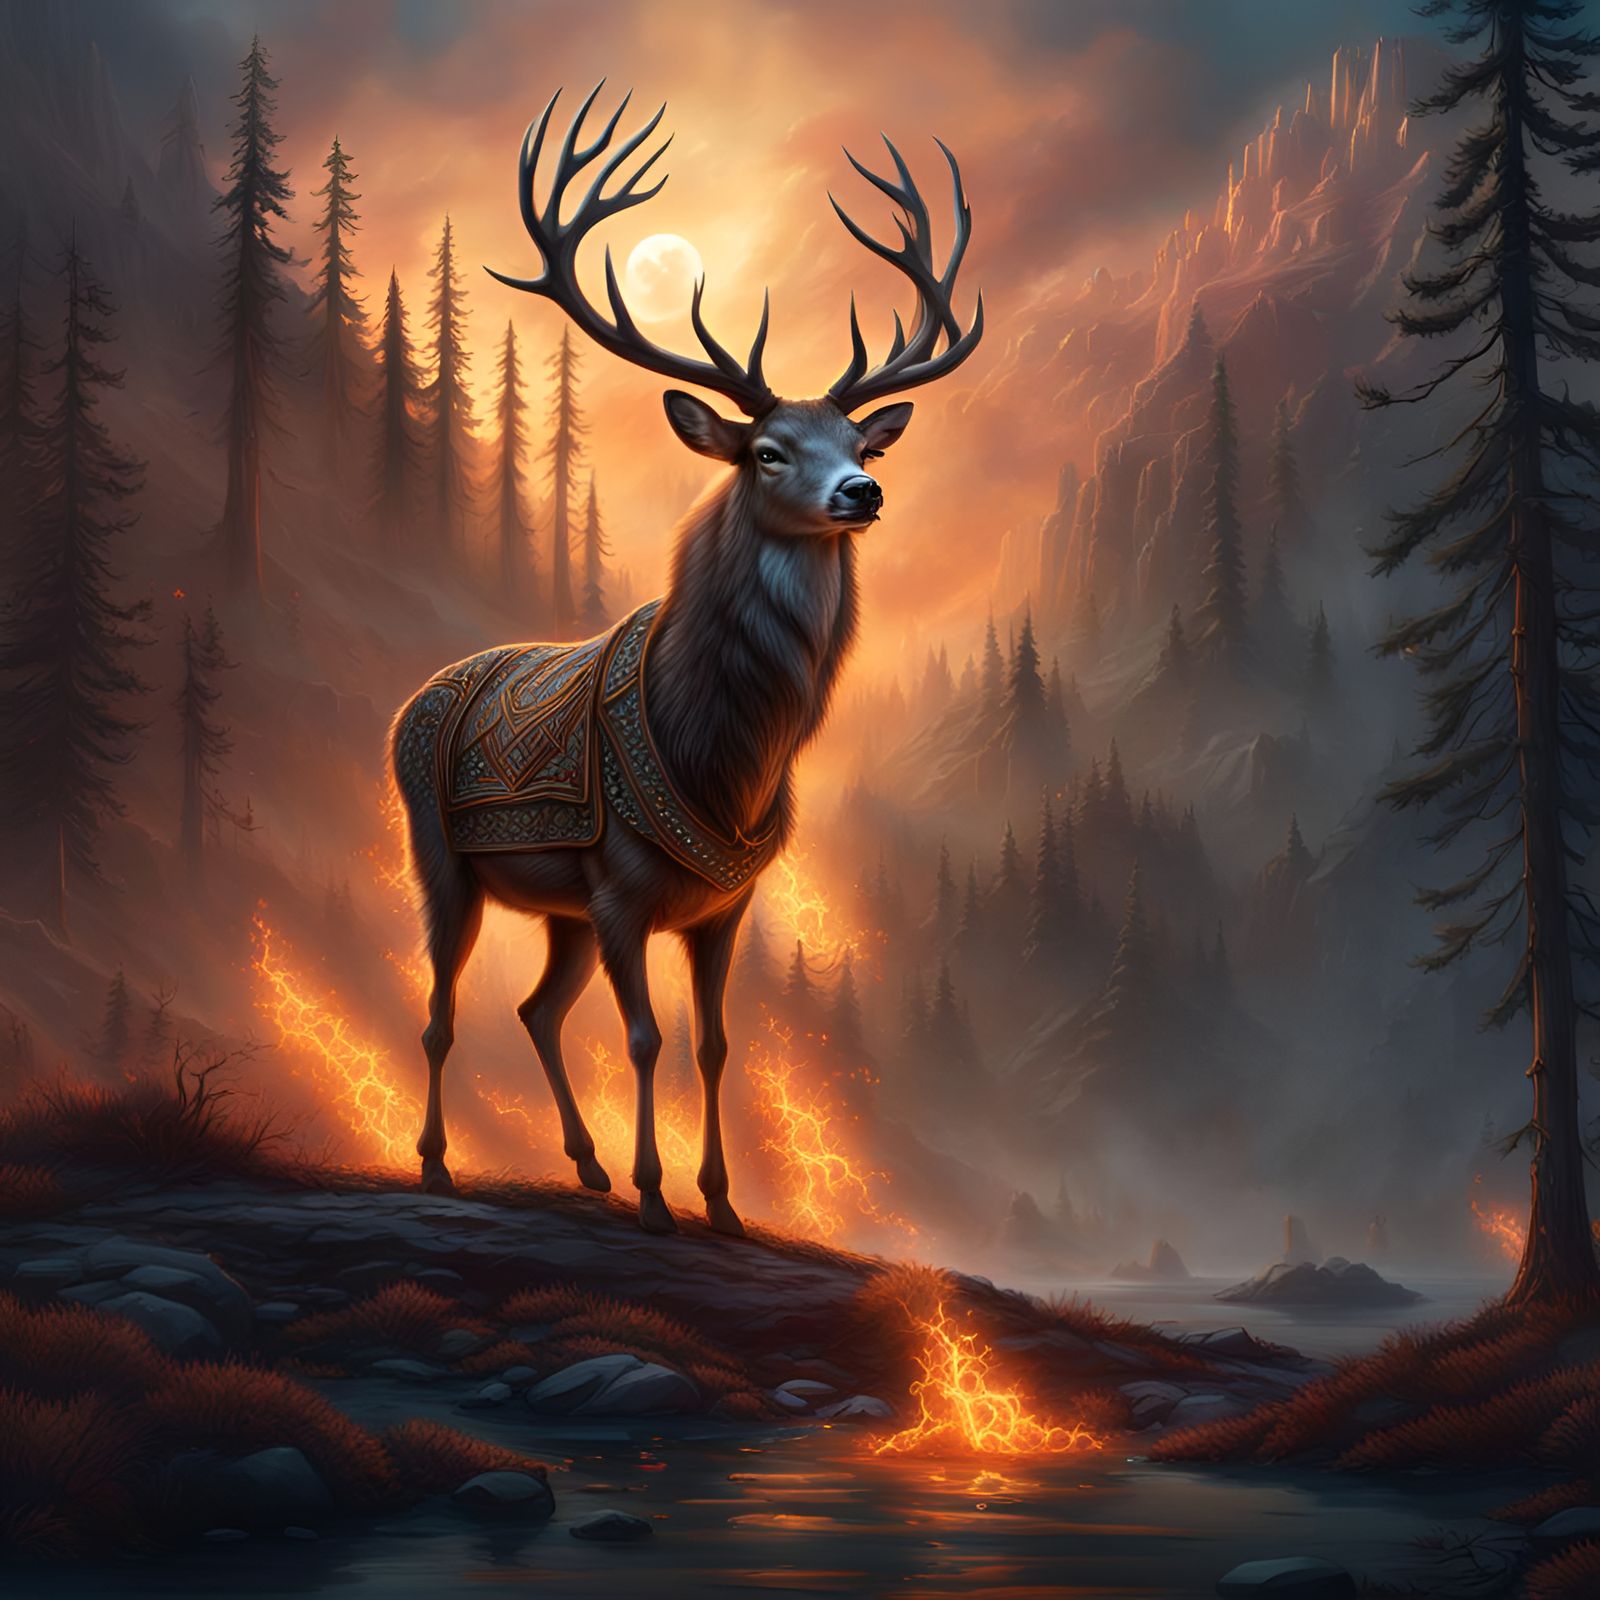 A native american is summoning the spirit of a beautiful deer out of the holy fire.